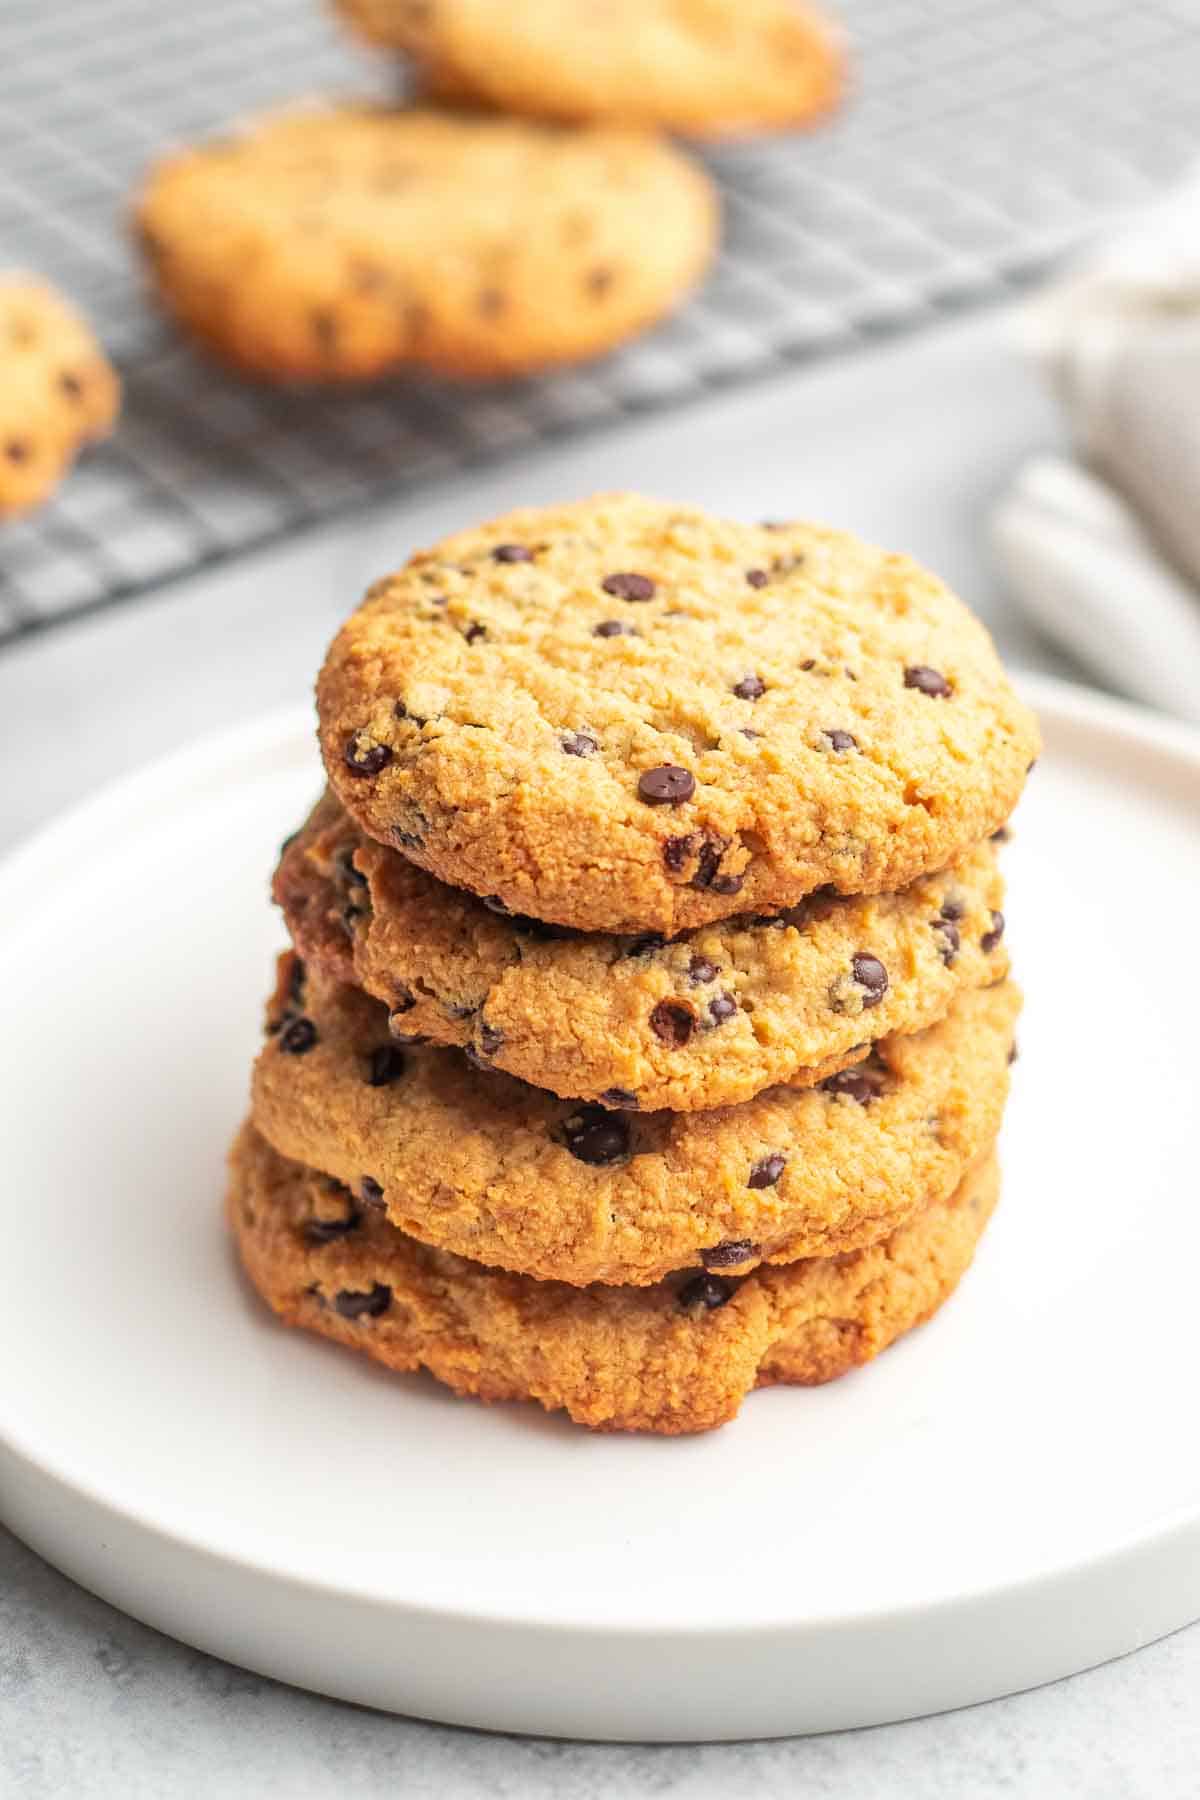 Stack of four Cream Cheese Chocolate Chip Cookies on a white plate